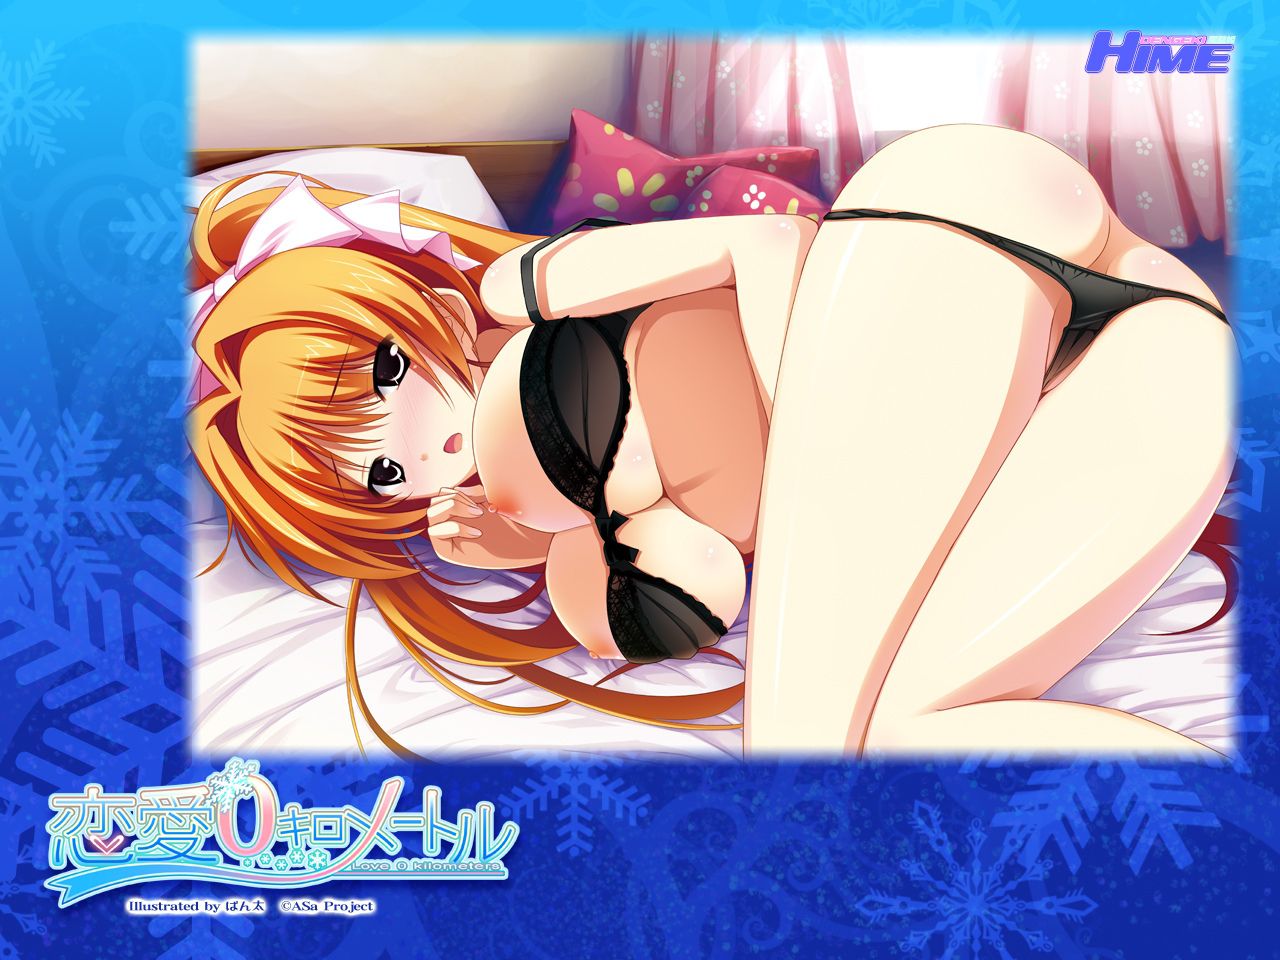 0 km [18 PC Bishoujo game CG] love wallpapers and pictures part 1 4